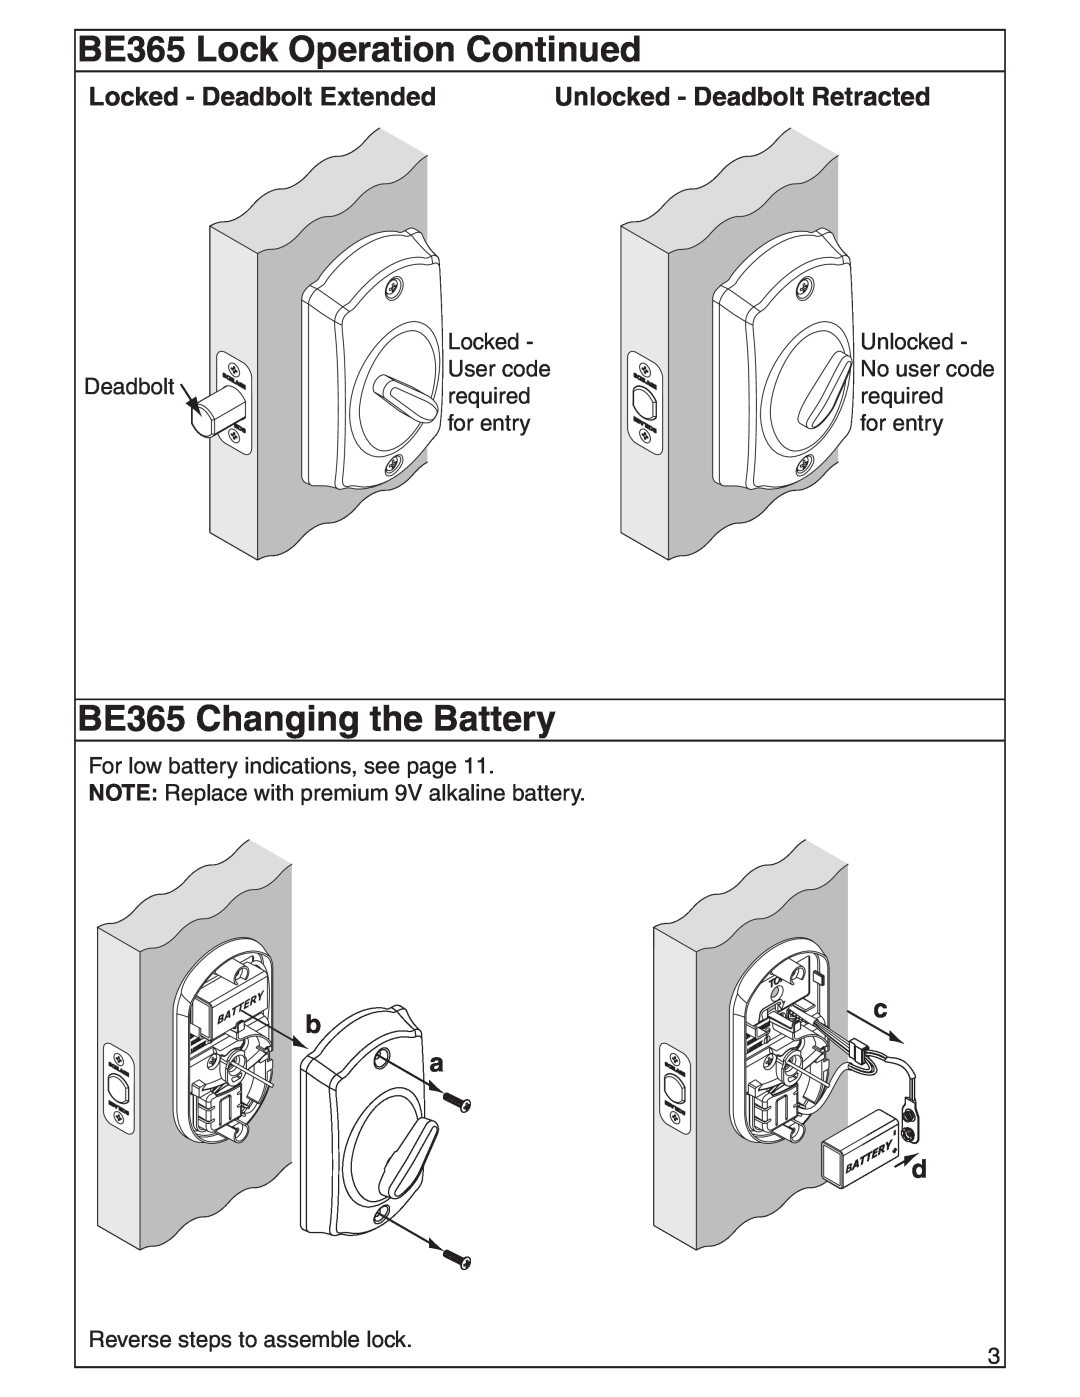 Schlage FE595, FE575 manual BE365 Lock Operation Continued, BE365 Changing the Battery, Locked - Deadbolt Extended 